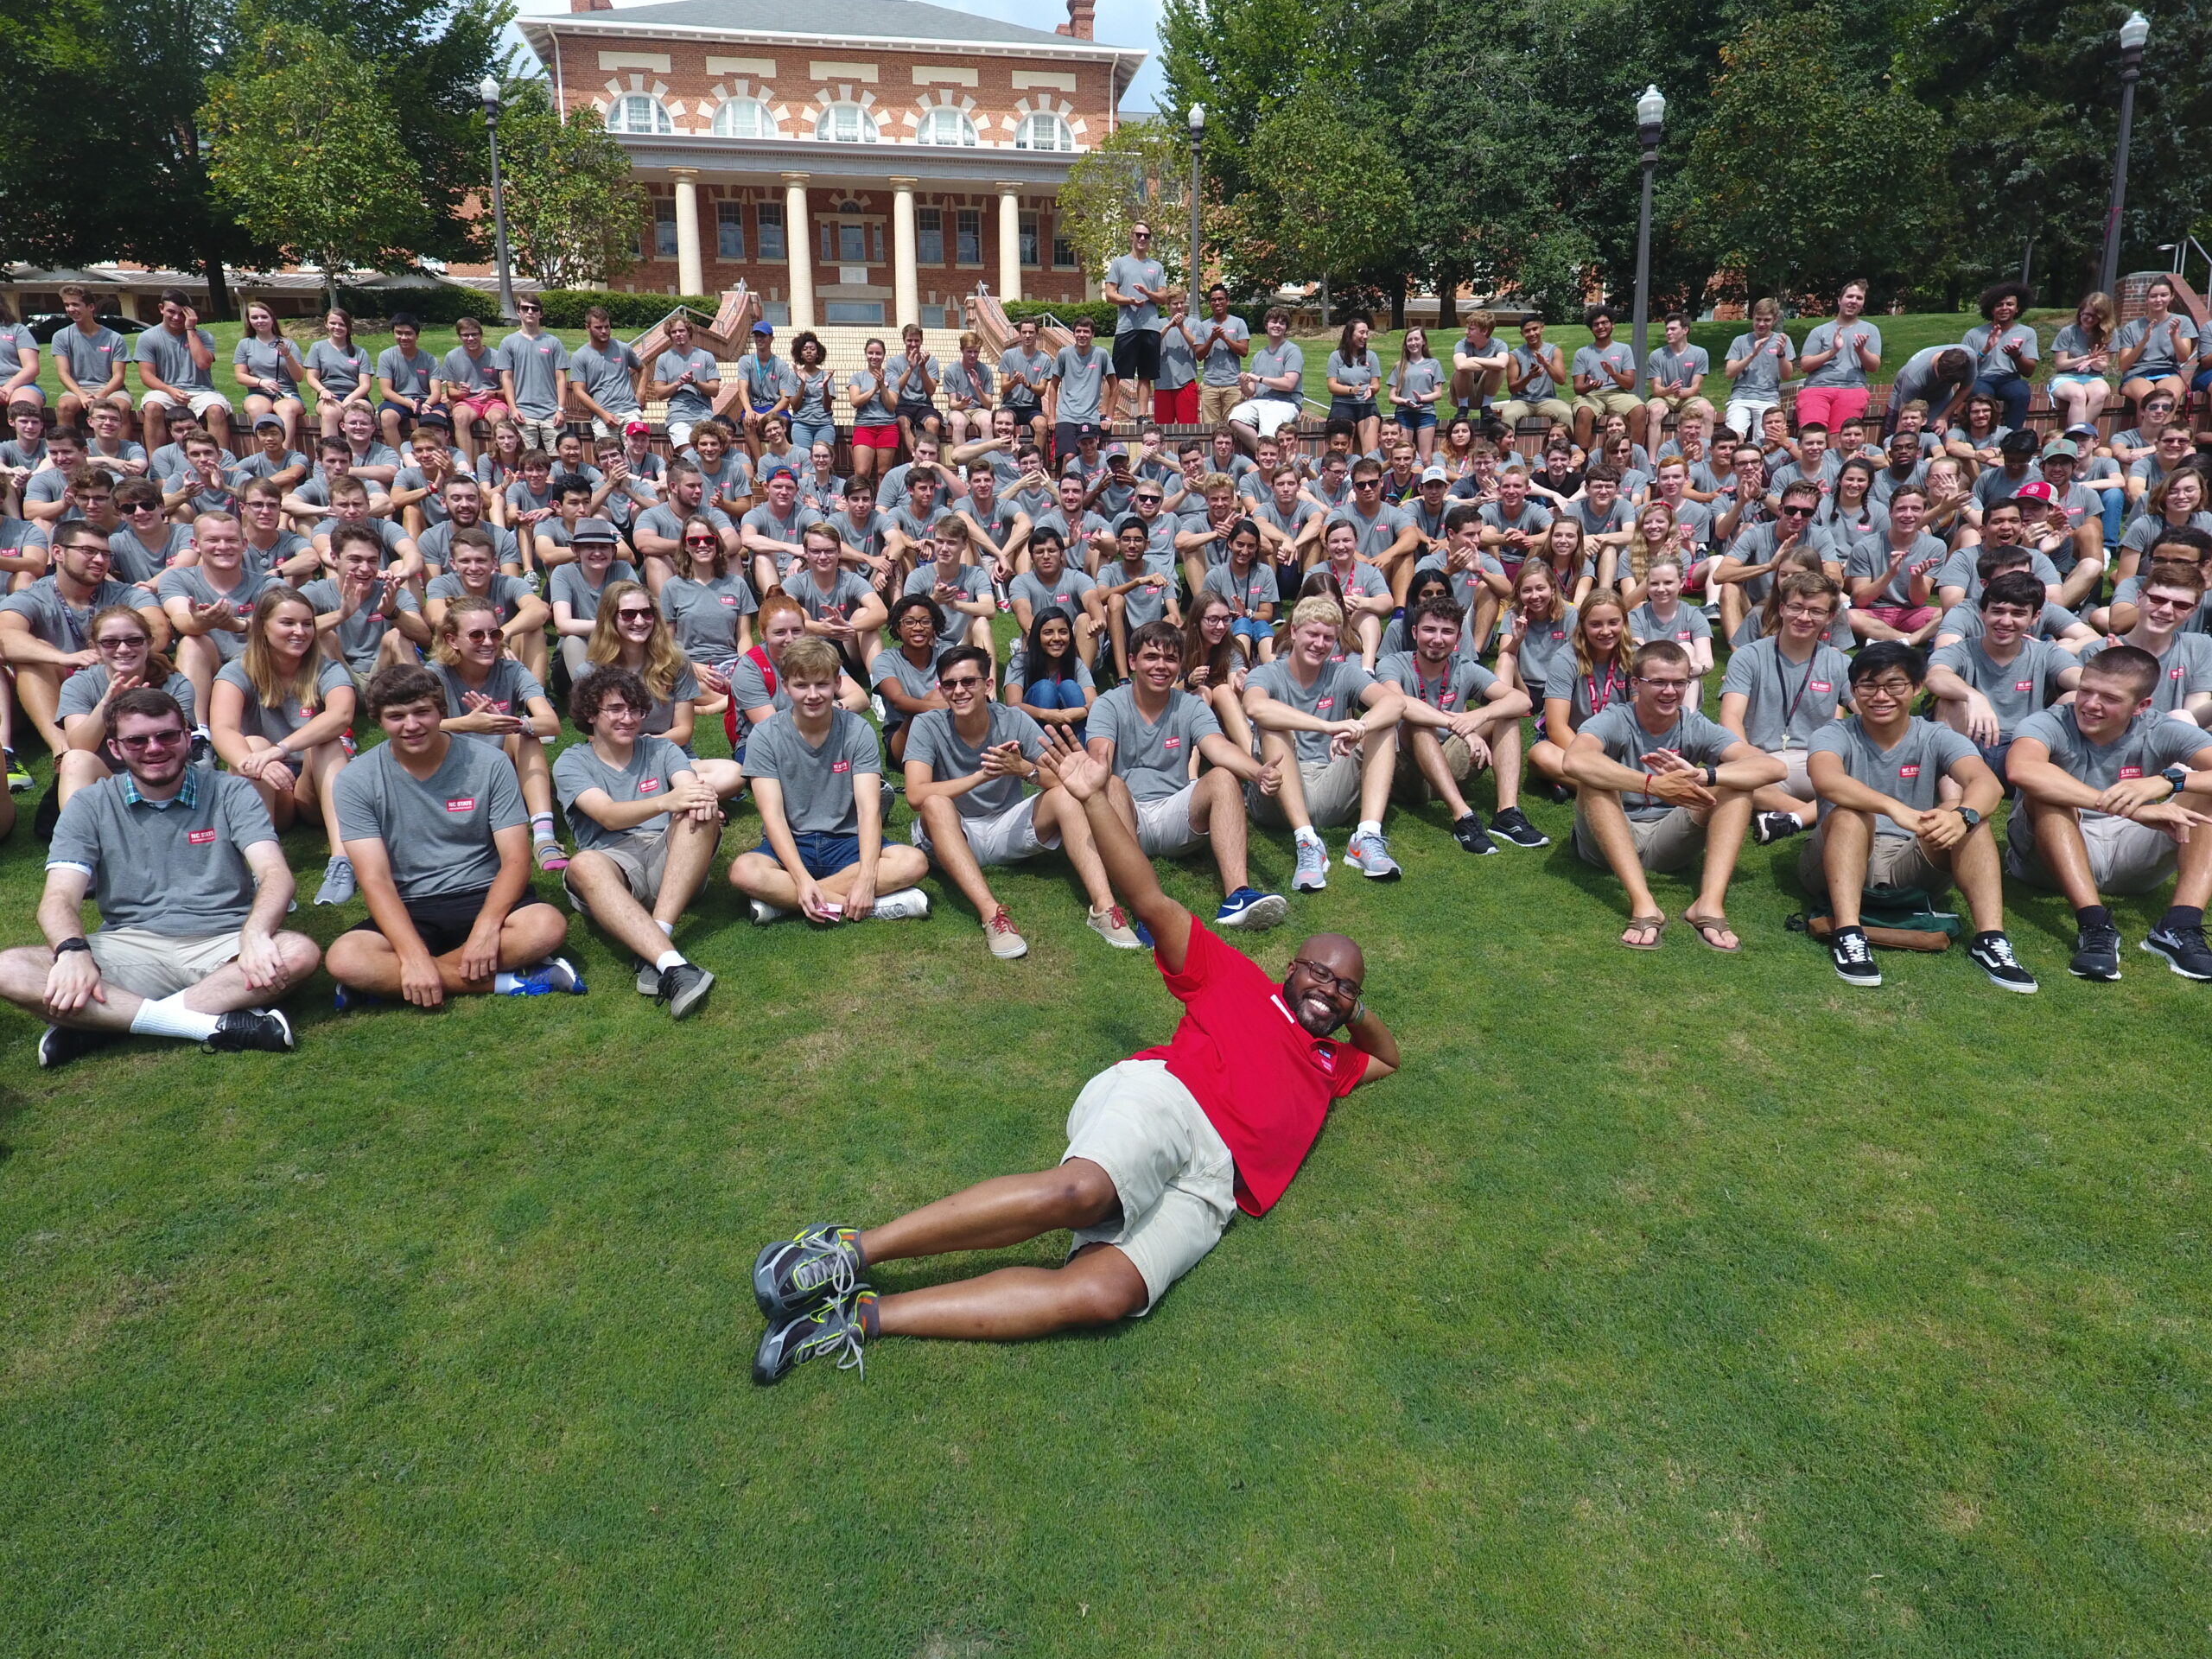 University Housing staff member poses with students on Quad.